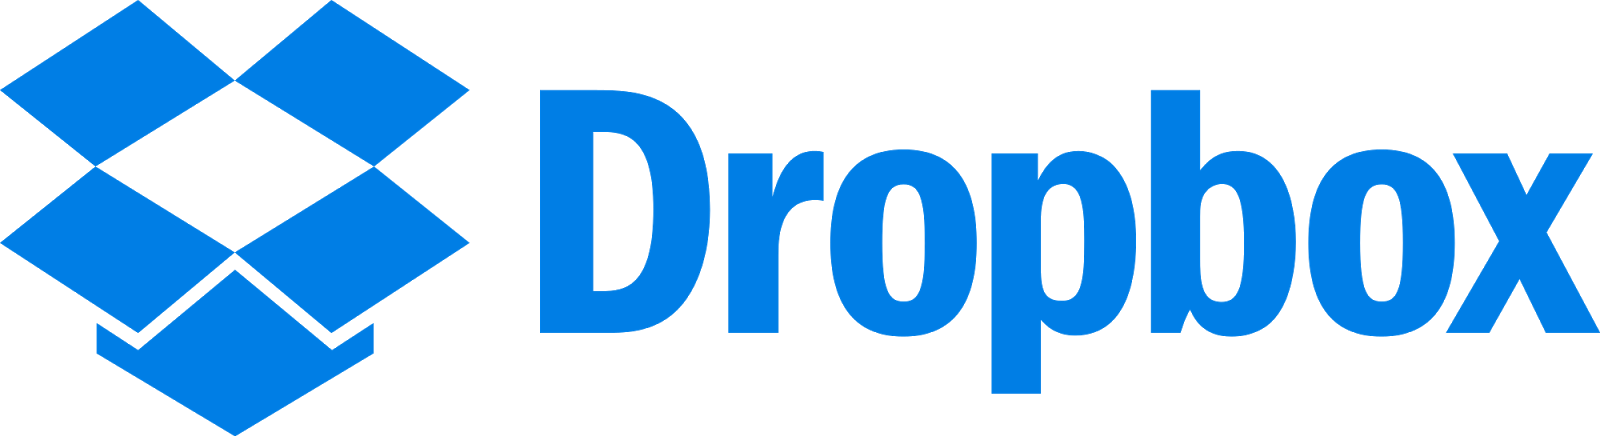 how to get free dropbox space 2016